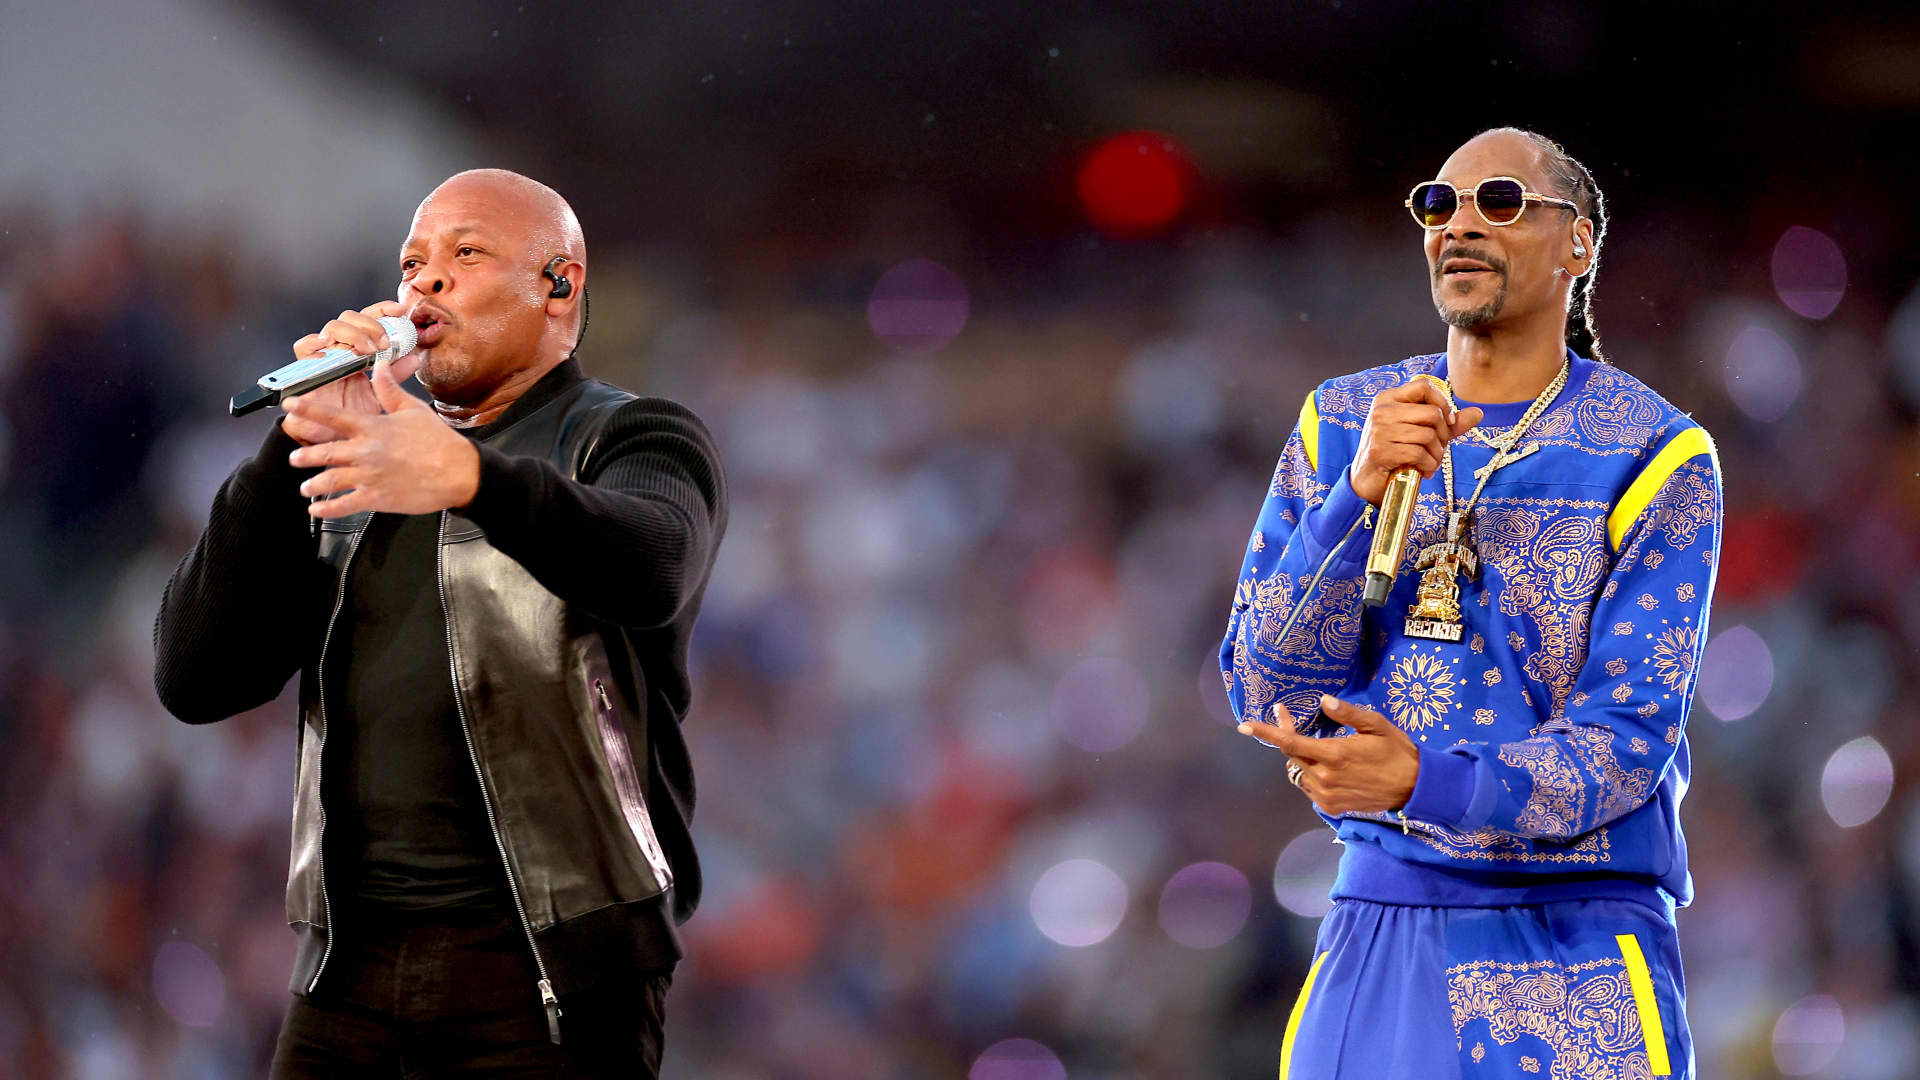 (L-R) Dr. Dre and Snoop Dogg perform during the Pepsi Super Bowl LVI Halftime Show at SoFi Stadium on February 13, 2022 in Inglewood, California.